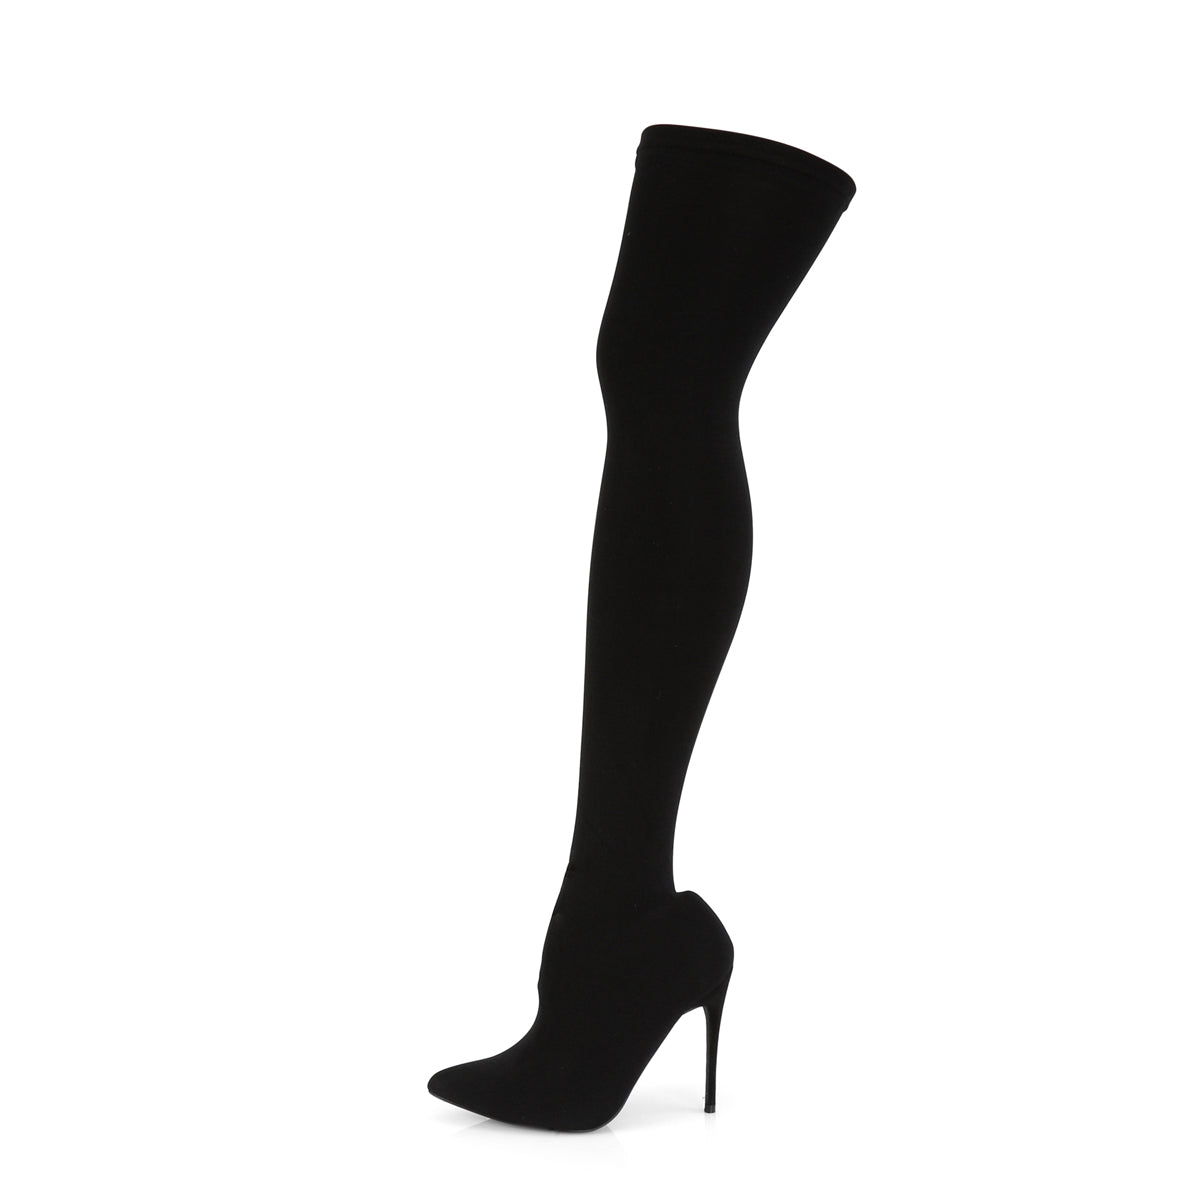 PLEASER Courtly-3005 Sexy Black Nylon Stretch Pull On 5" Heels Thigh High Boots - A Shoe Addiction Australia